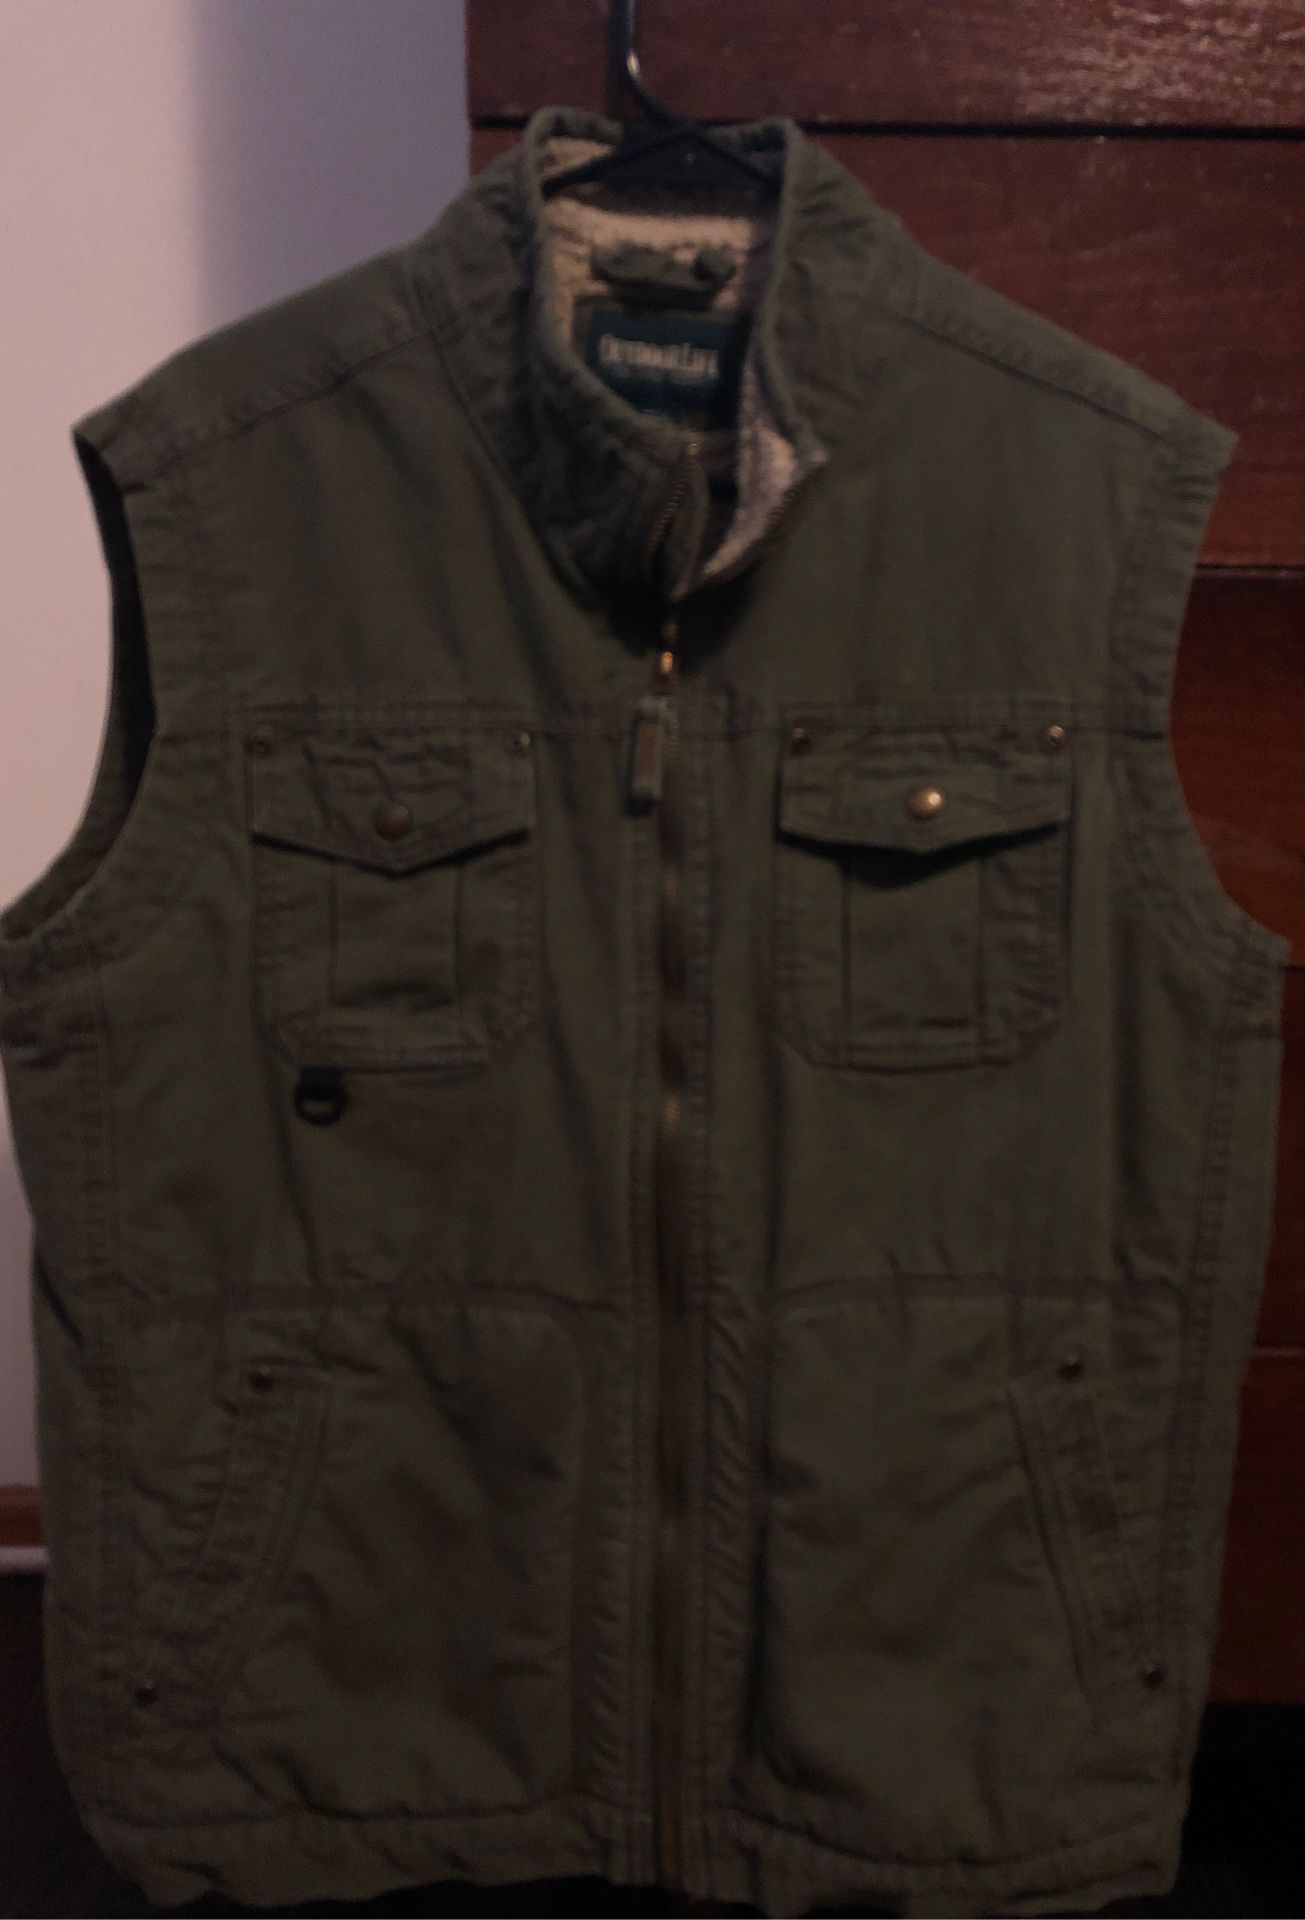 Outdoor life Sherpa vest brand new